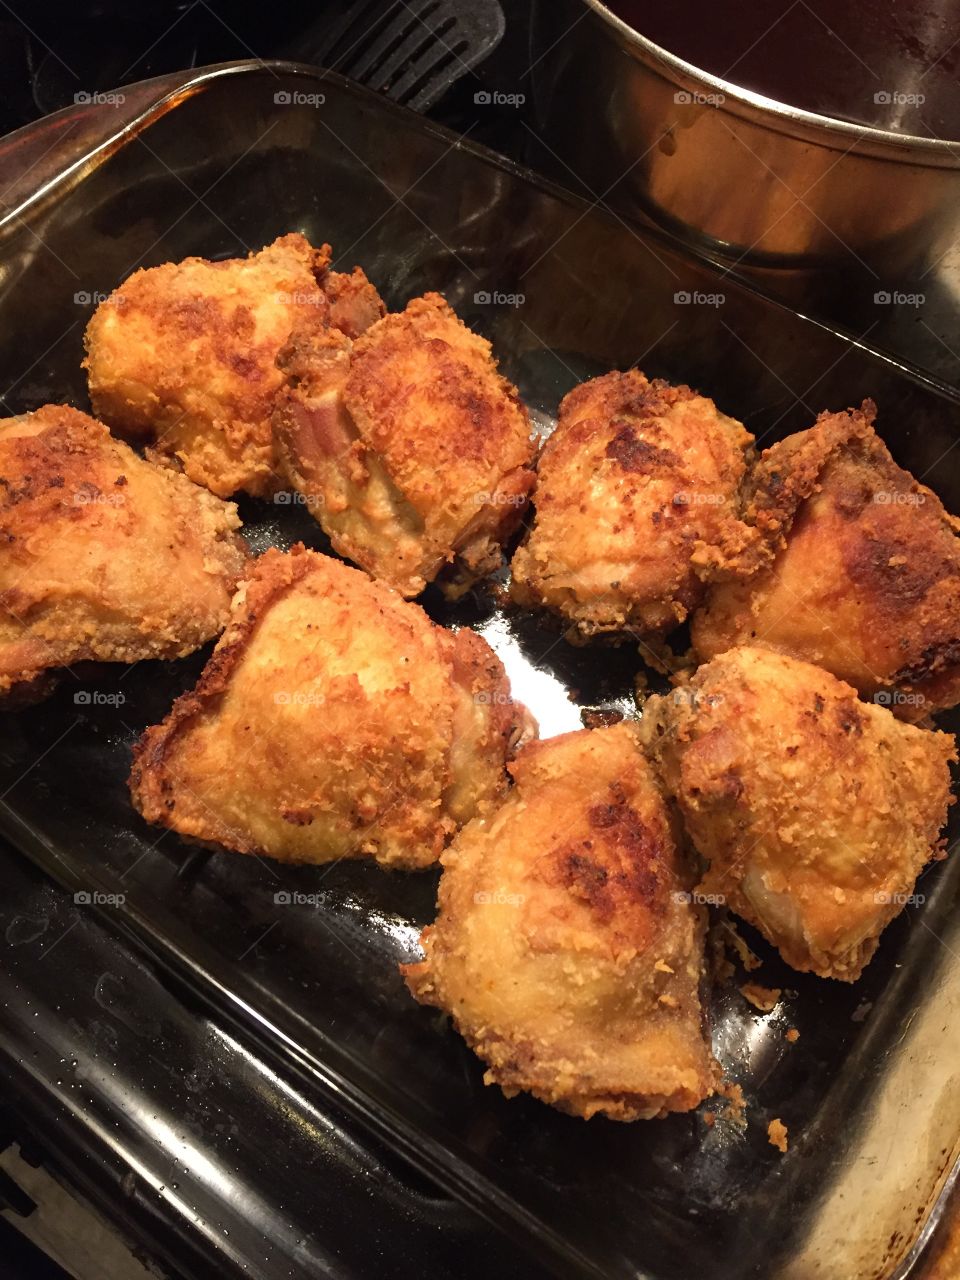 Synclair’s extra crunchy fried chicken thighs! 